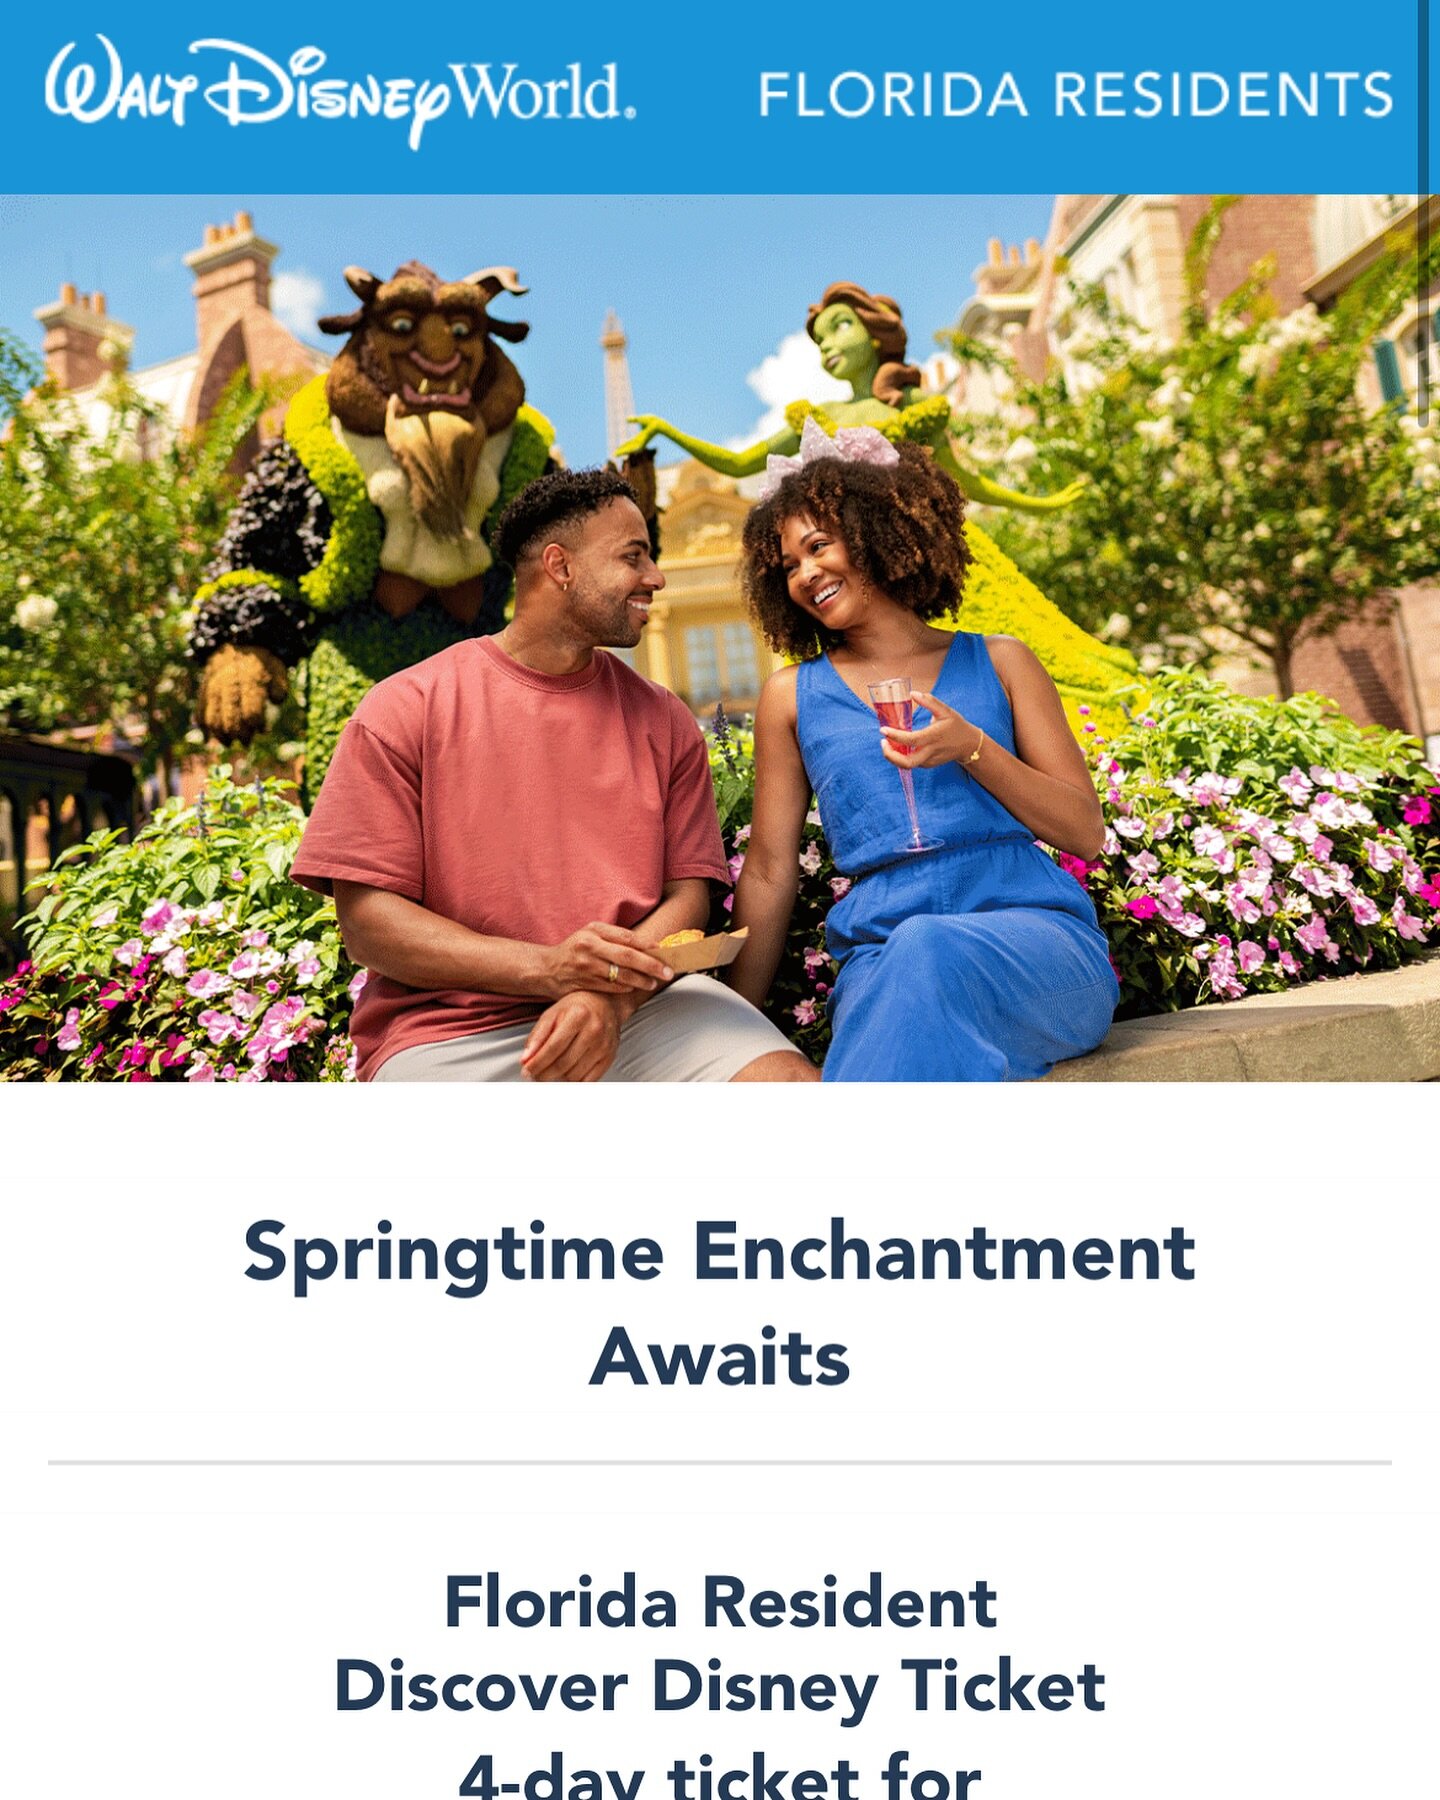 Love seeing shoots we worked on show up in our email! @waltdisneyworld @wdwannualpassholders 🌸 @flore.stylist 
.
.
#styling #disney #disneystyle #disneyworld #disneyoutfits #annualpassholder #disneyoutfitideas #epcot